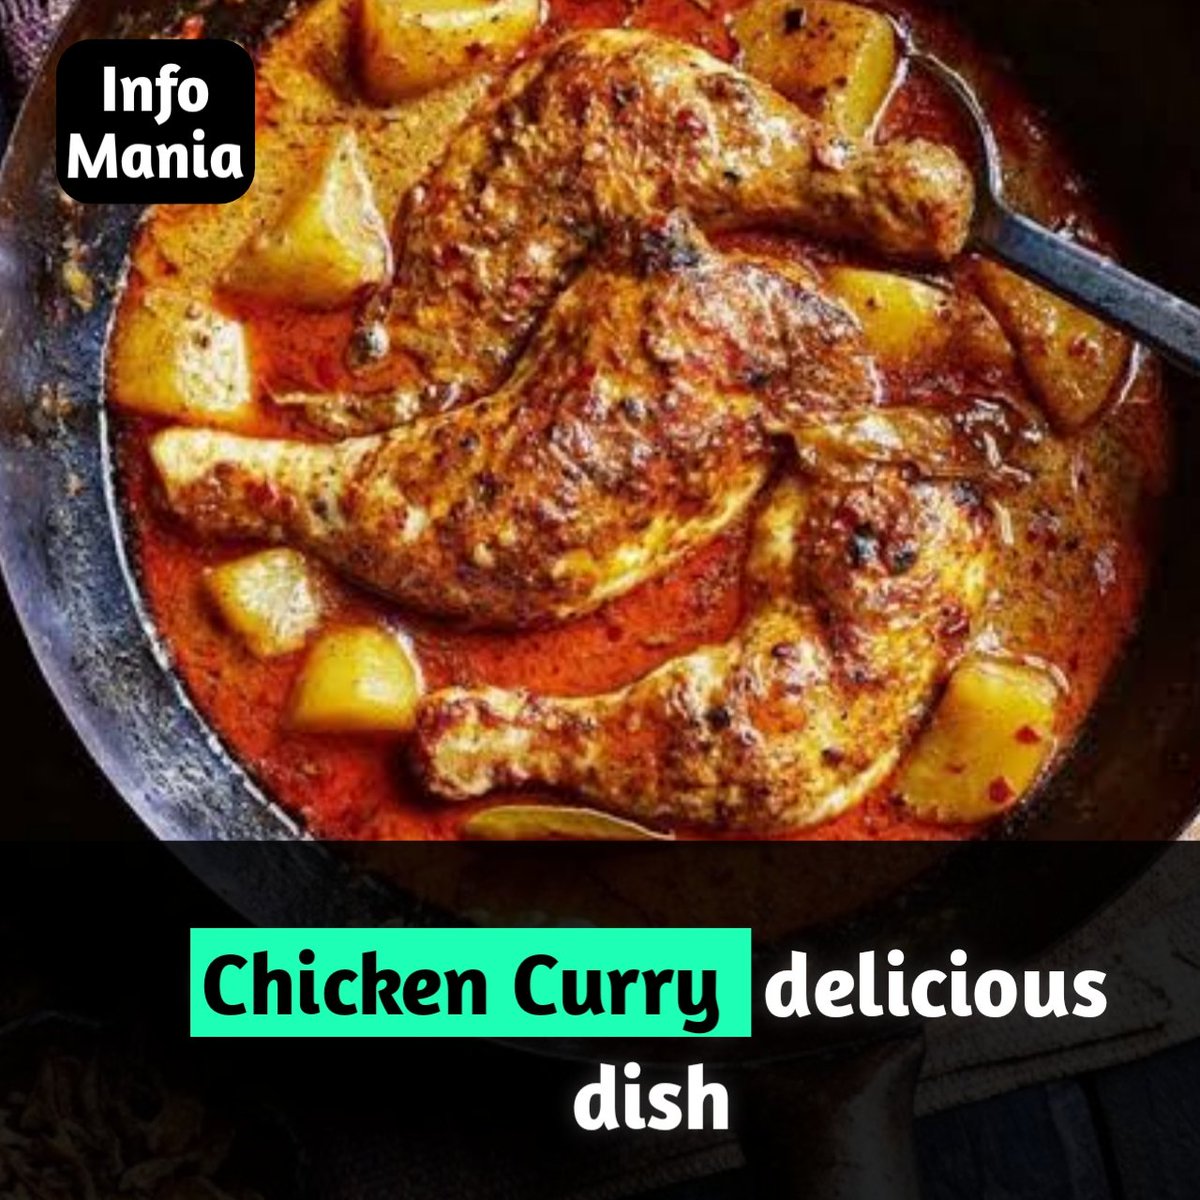 #chicken
#Chickencurry
Make chicken curry at home easy read in comments